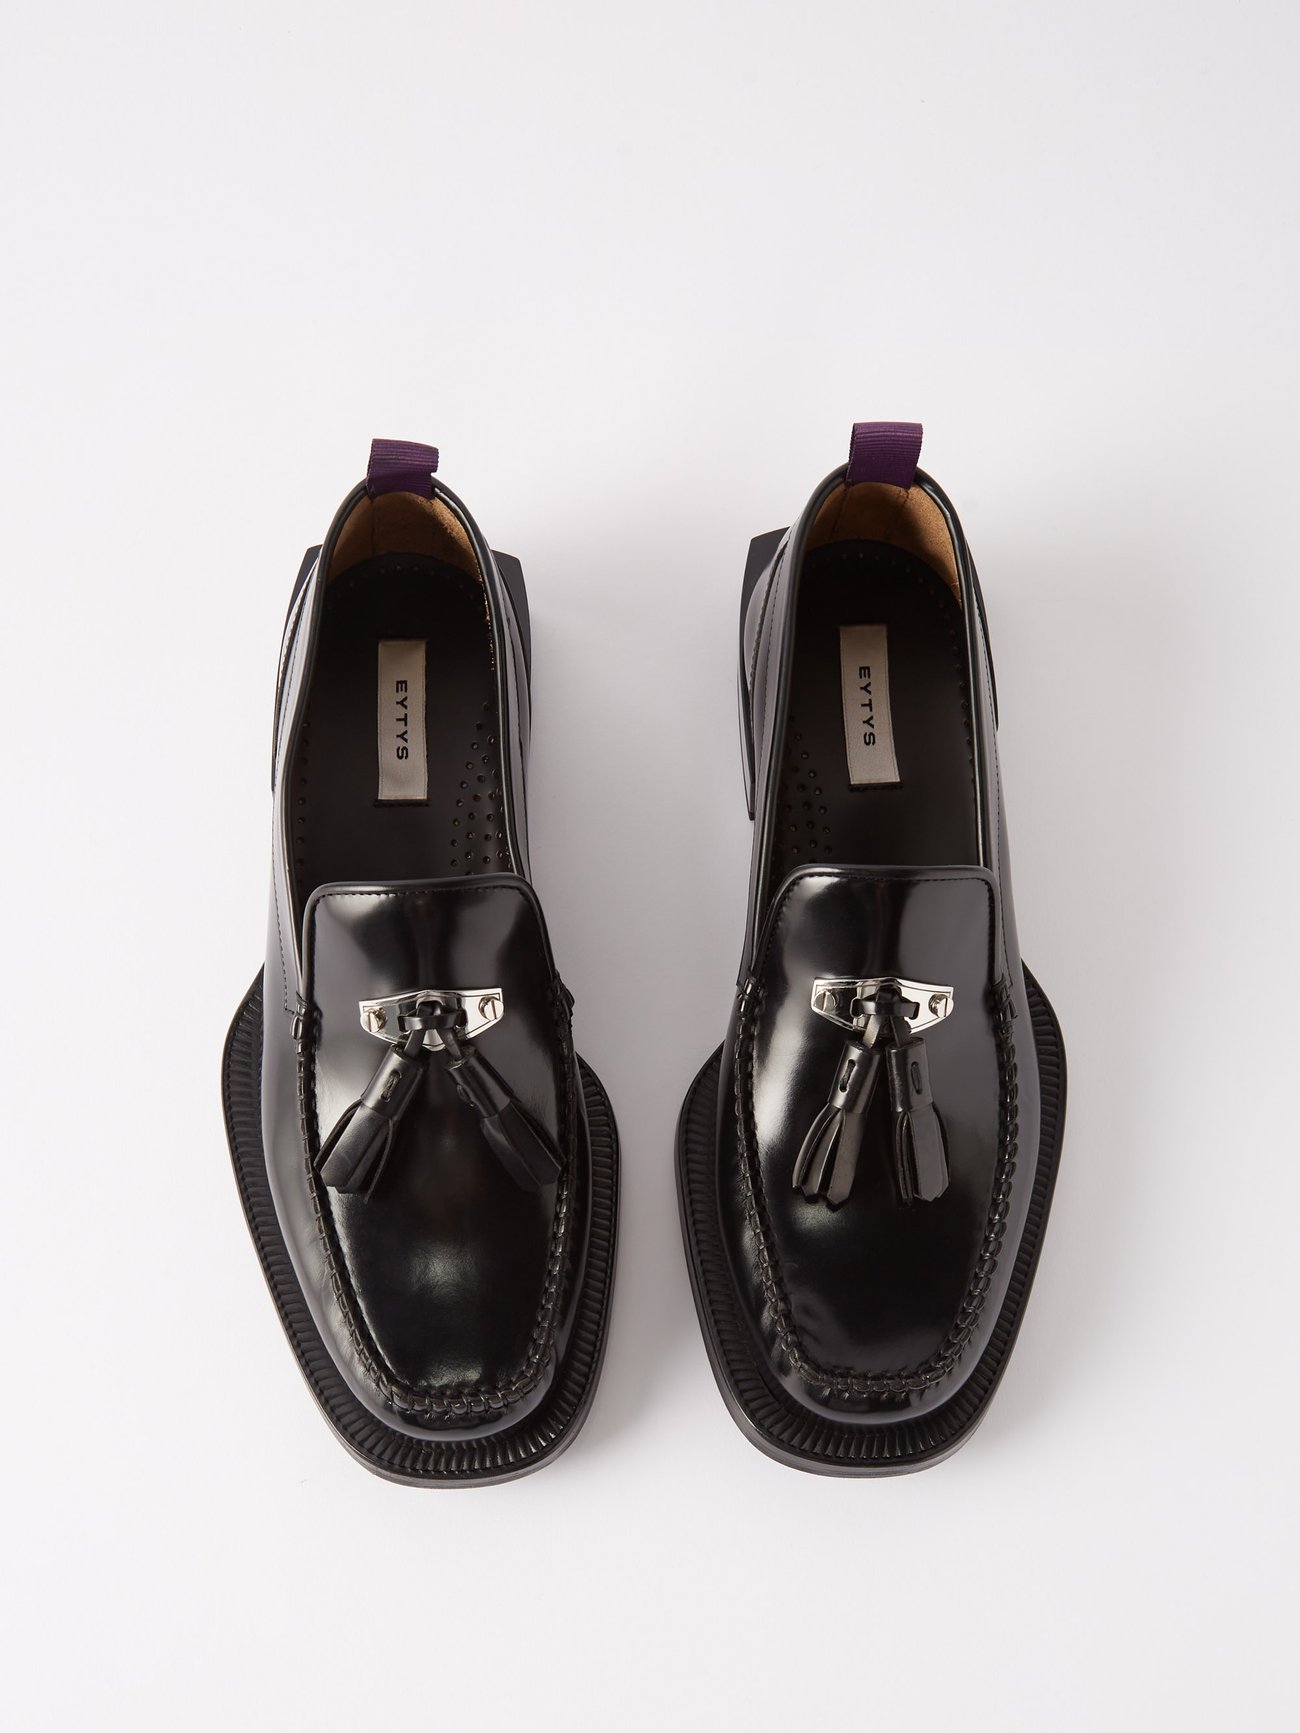 Rio leather loafers